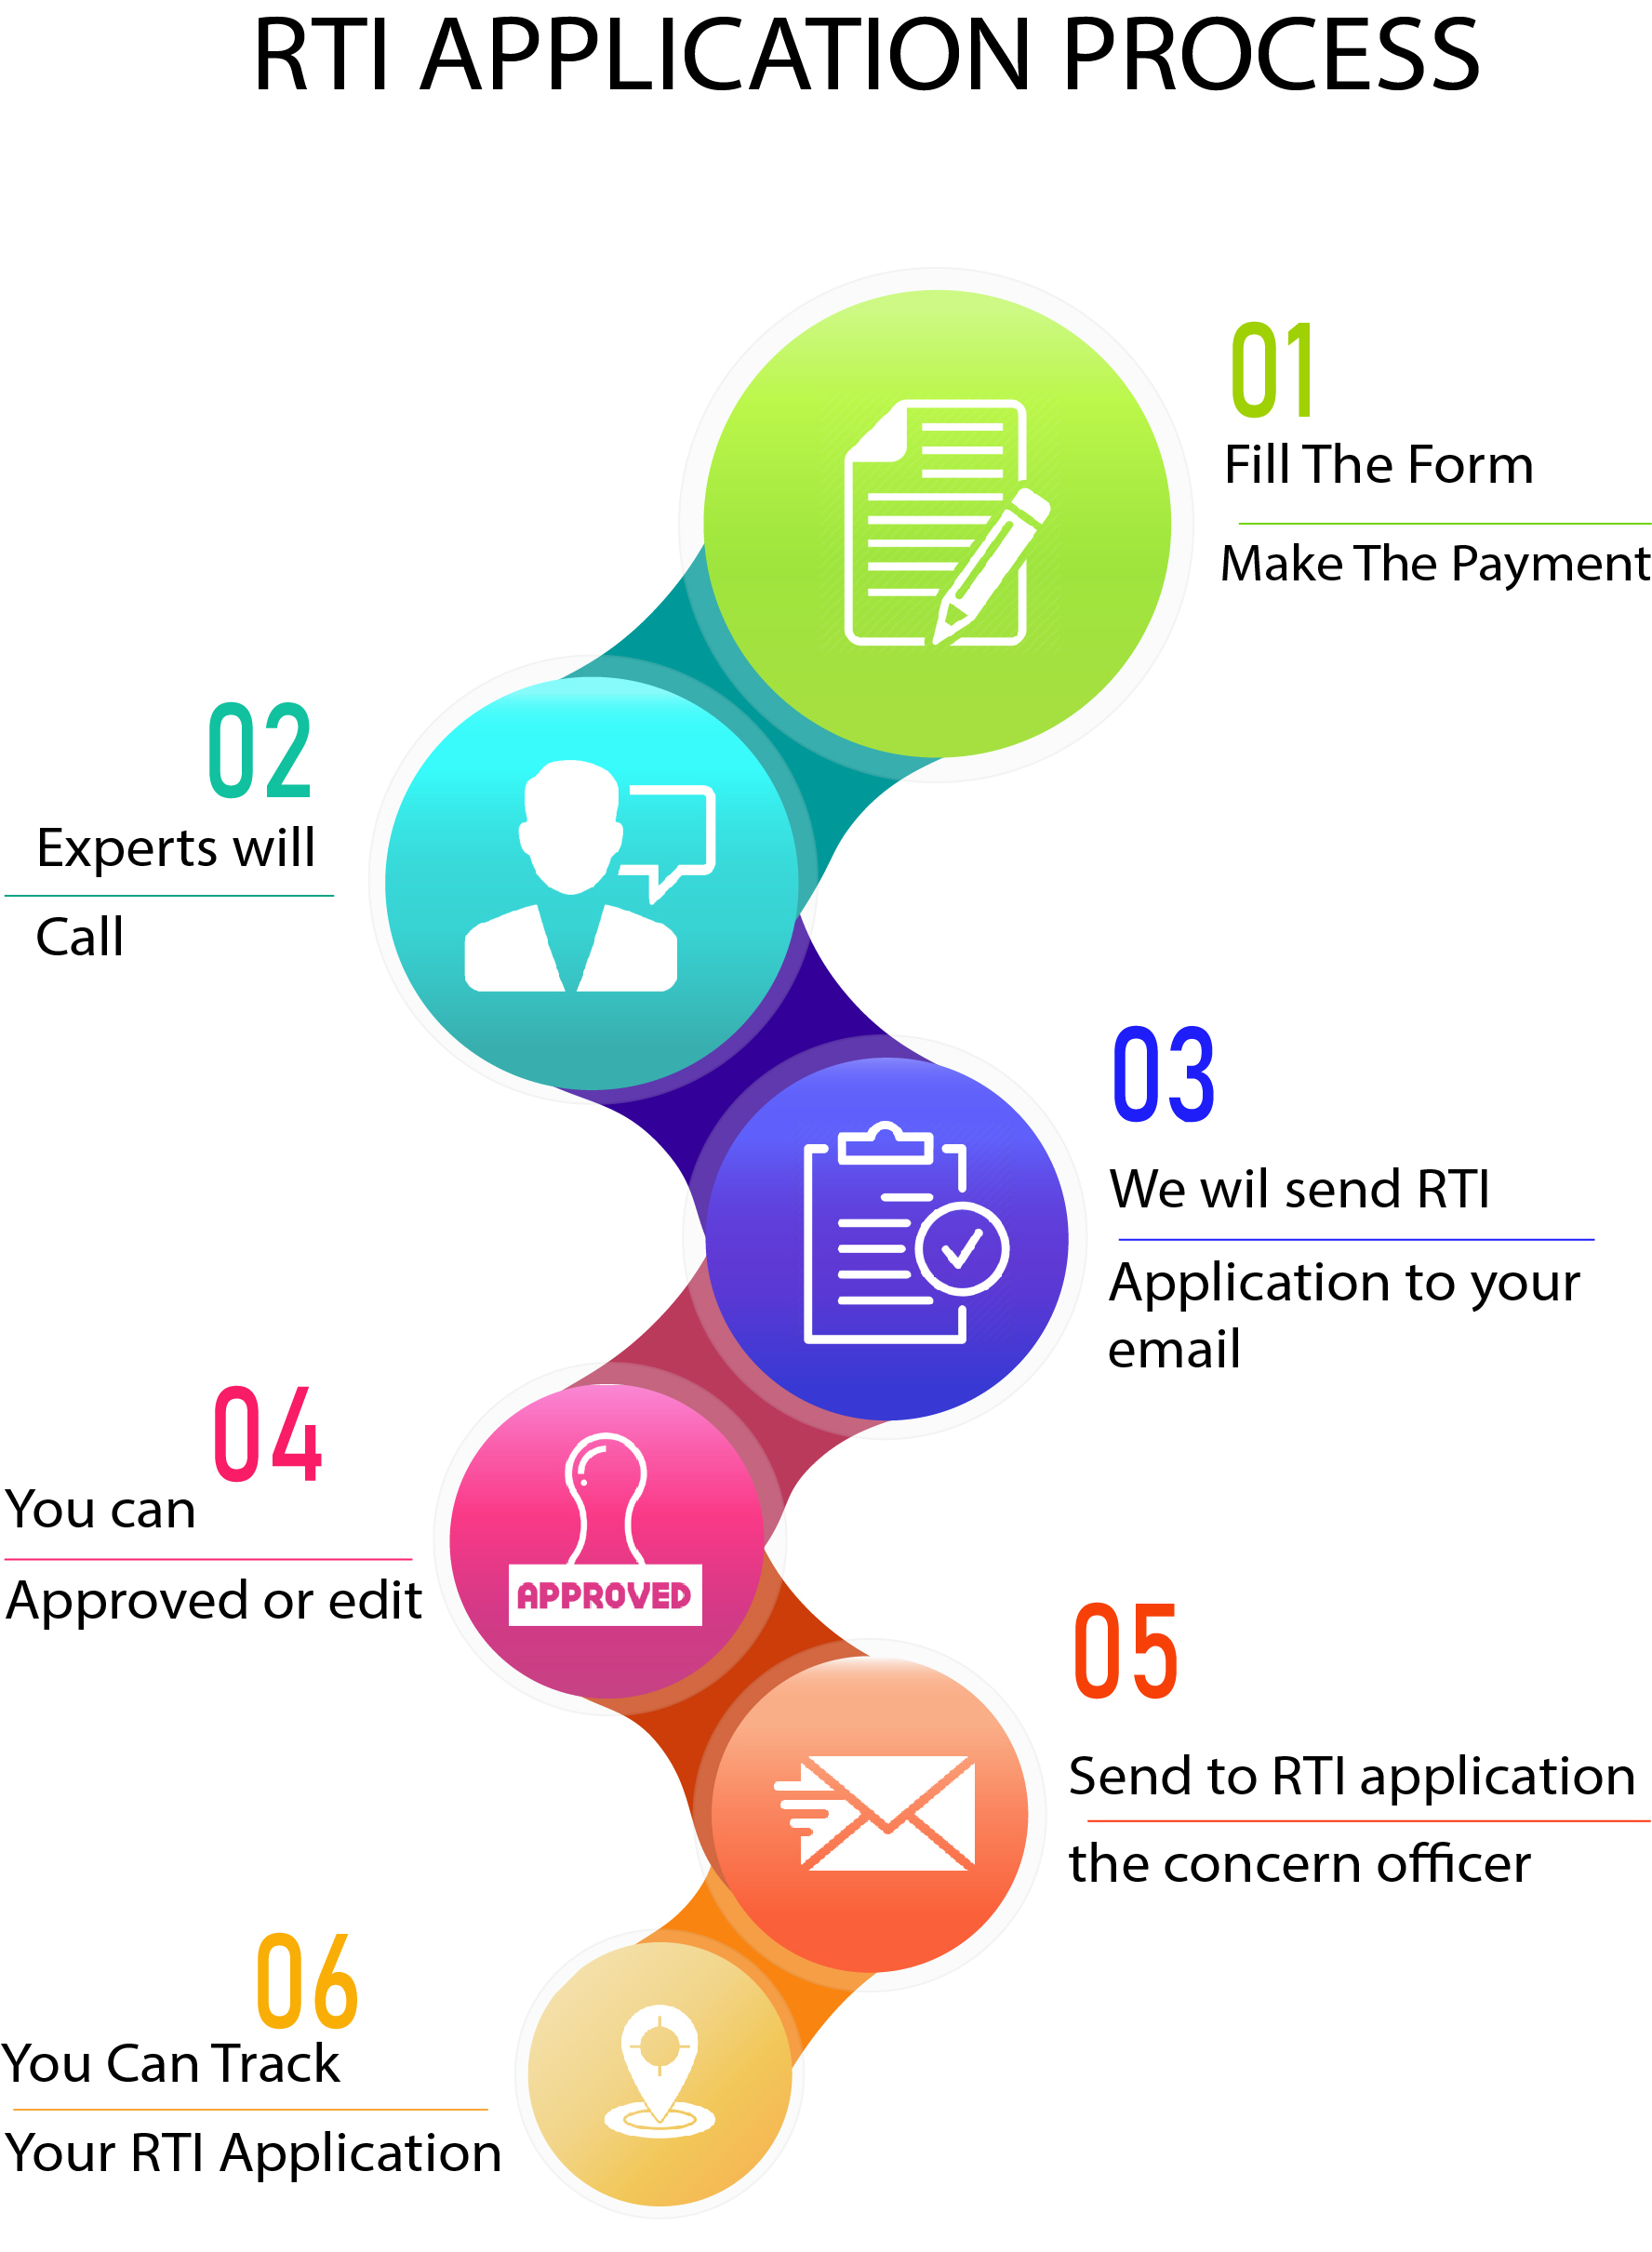 our process of filing rti online application form at Legalution.in